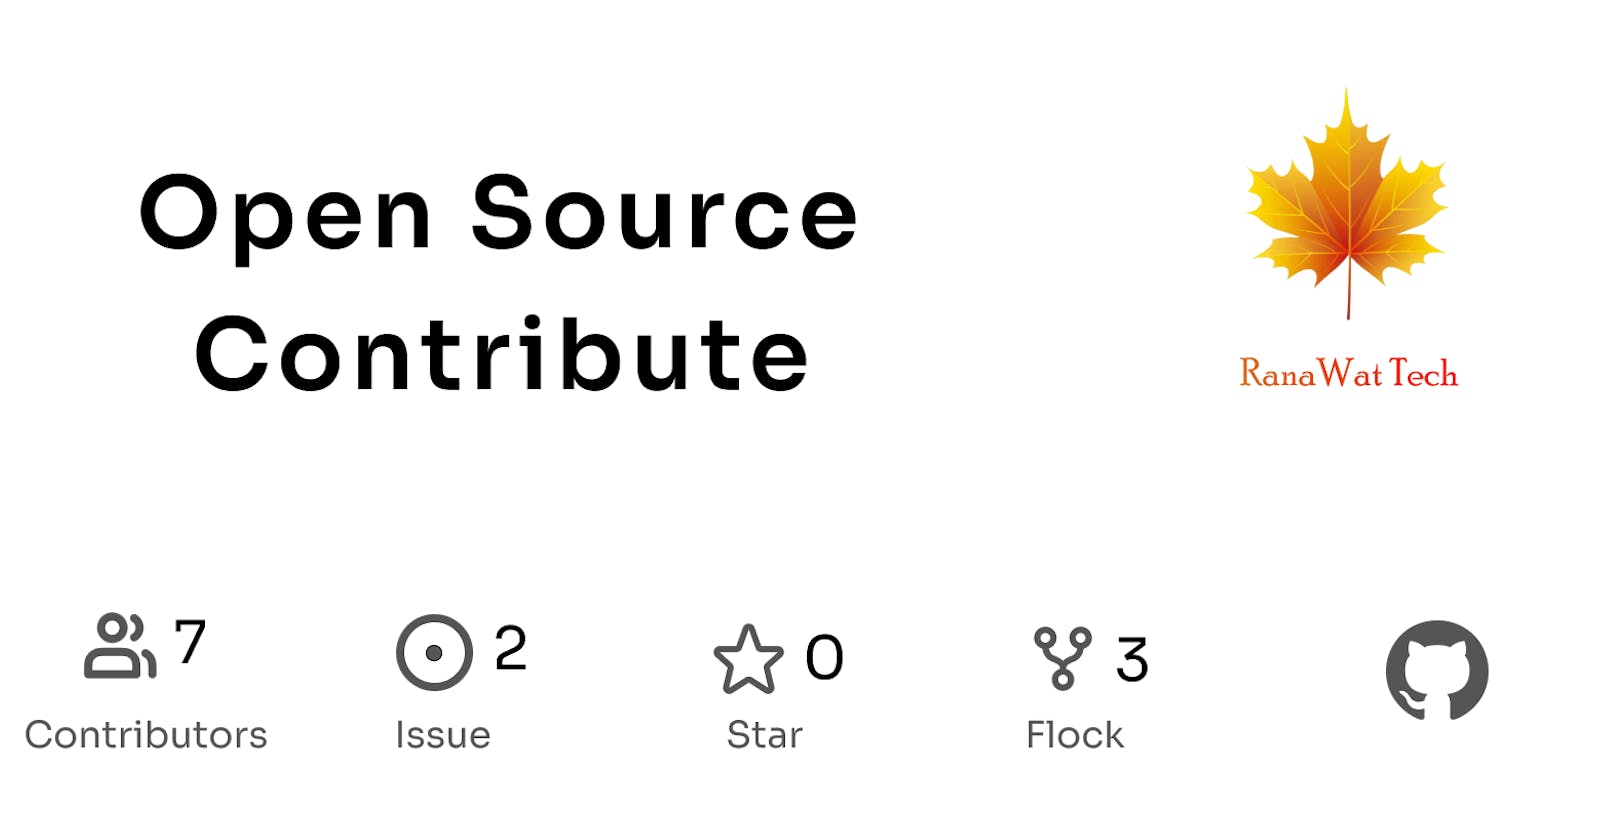 How to Contribute to an Open Source?